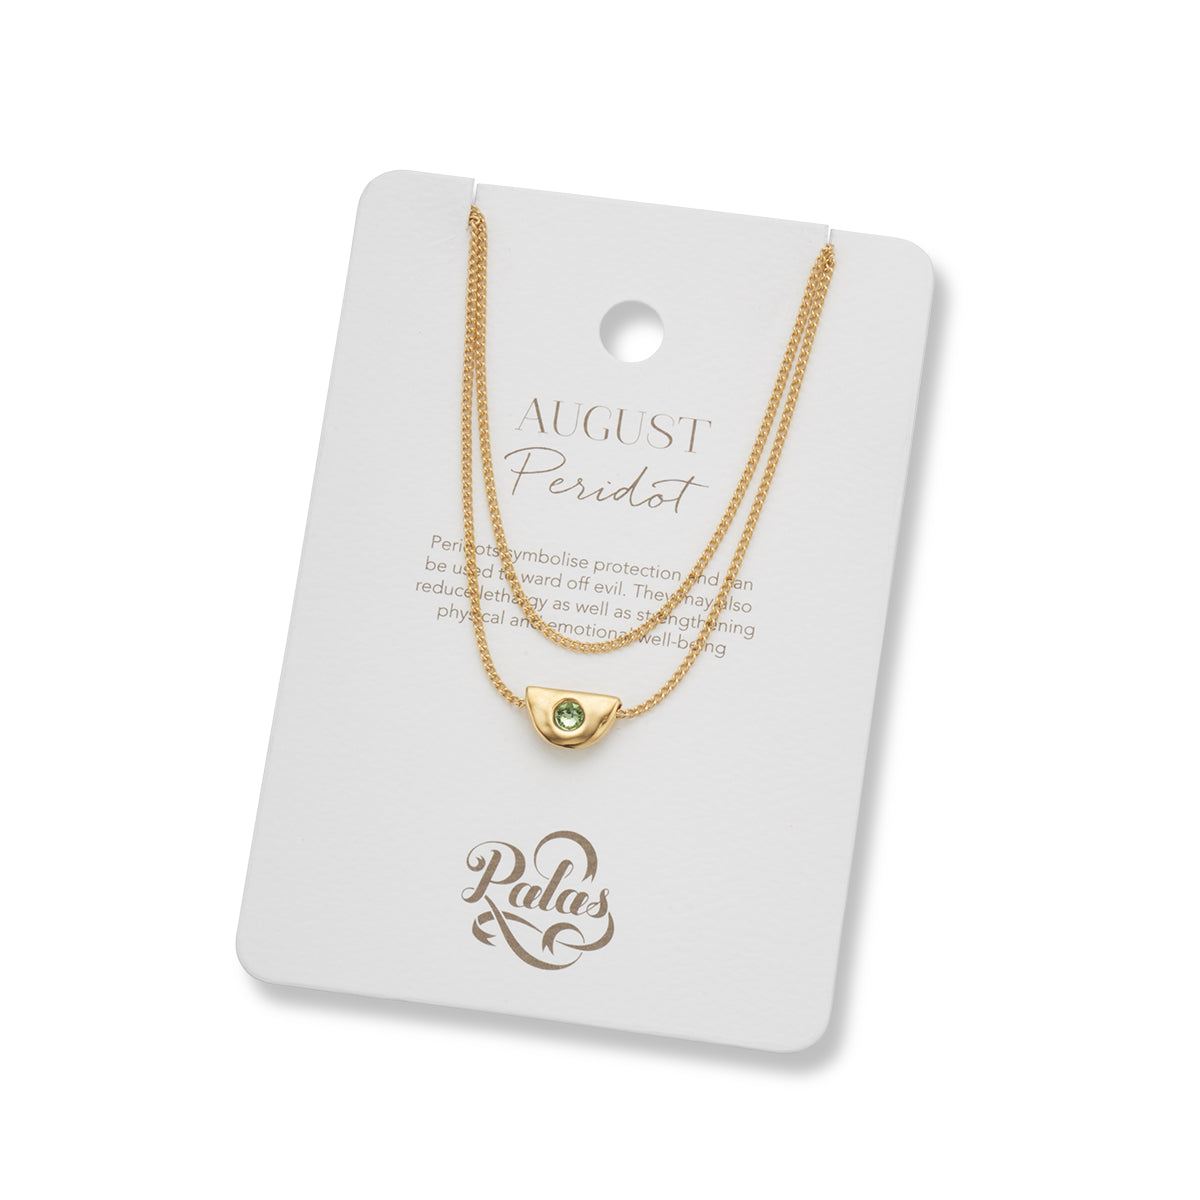 August peridot birthstone necklace 18k gold plated